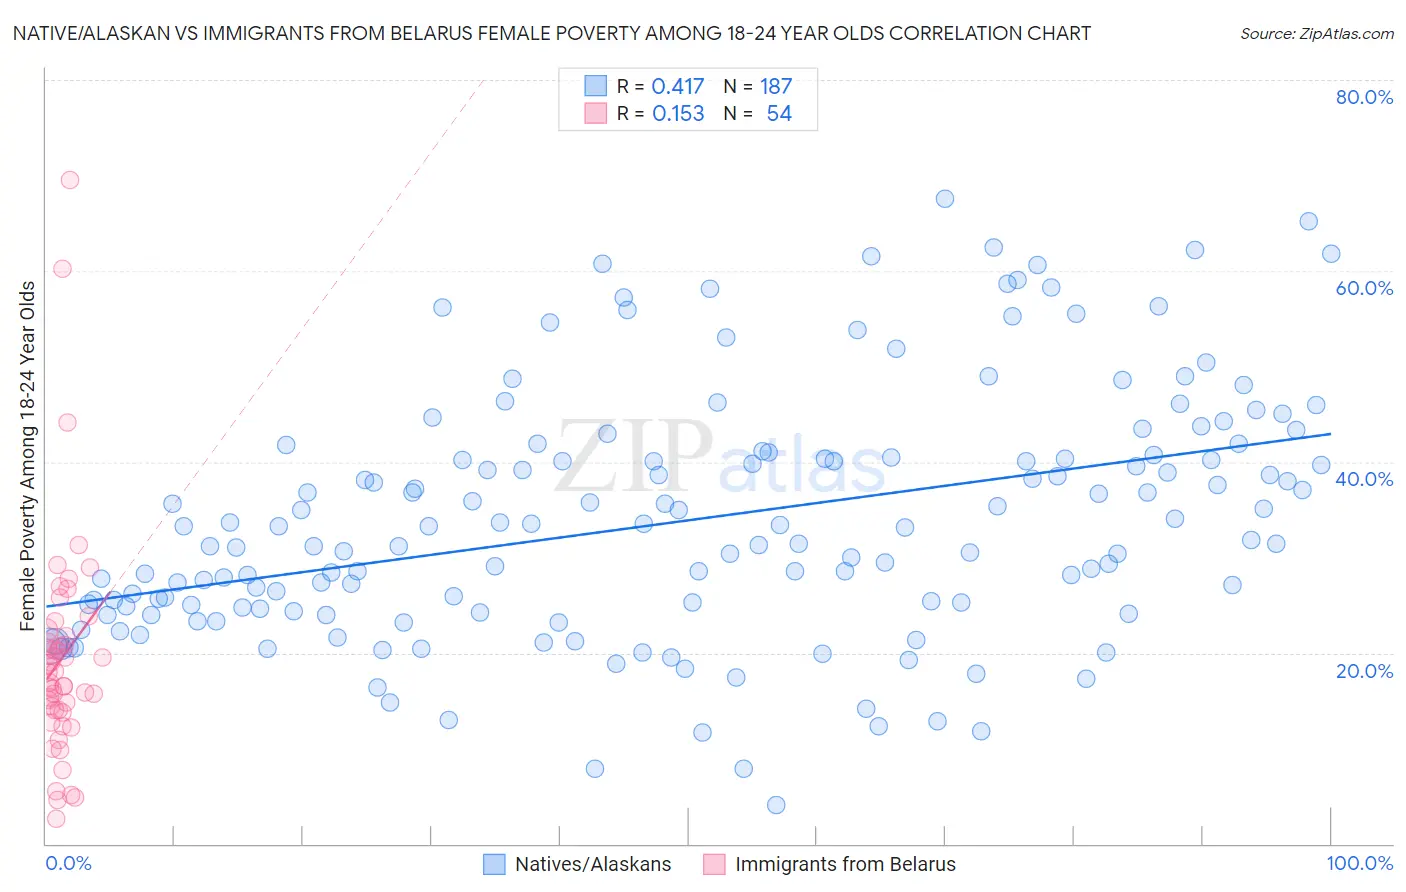 Native/Alaskan vs Immigrants from Belarus Female Poverty Among 18-24 Year Olds